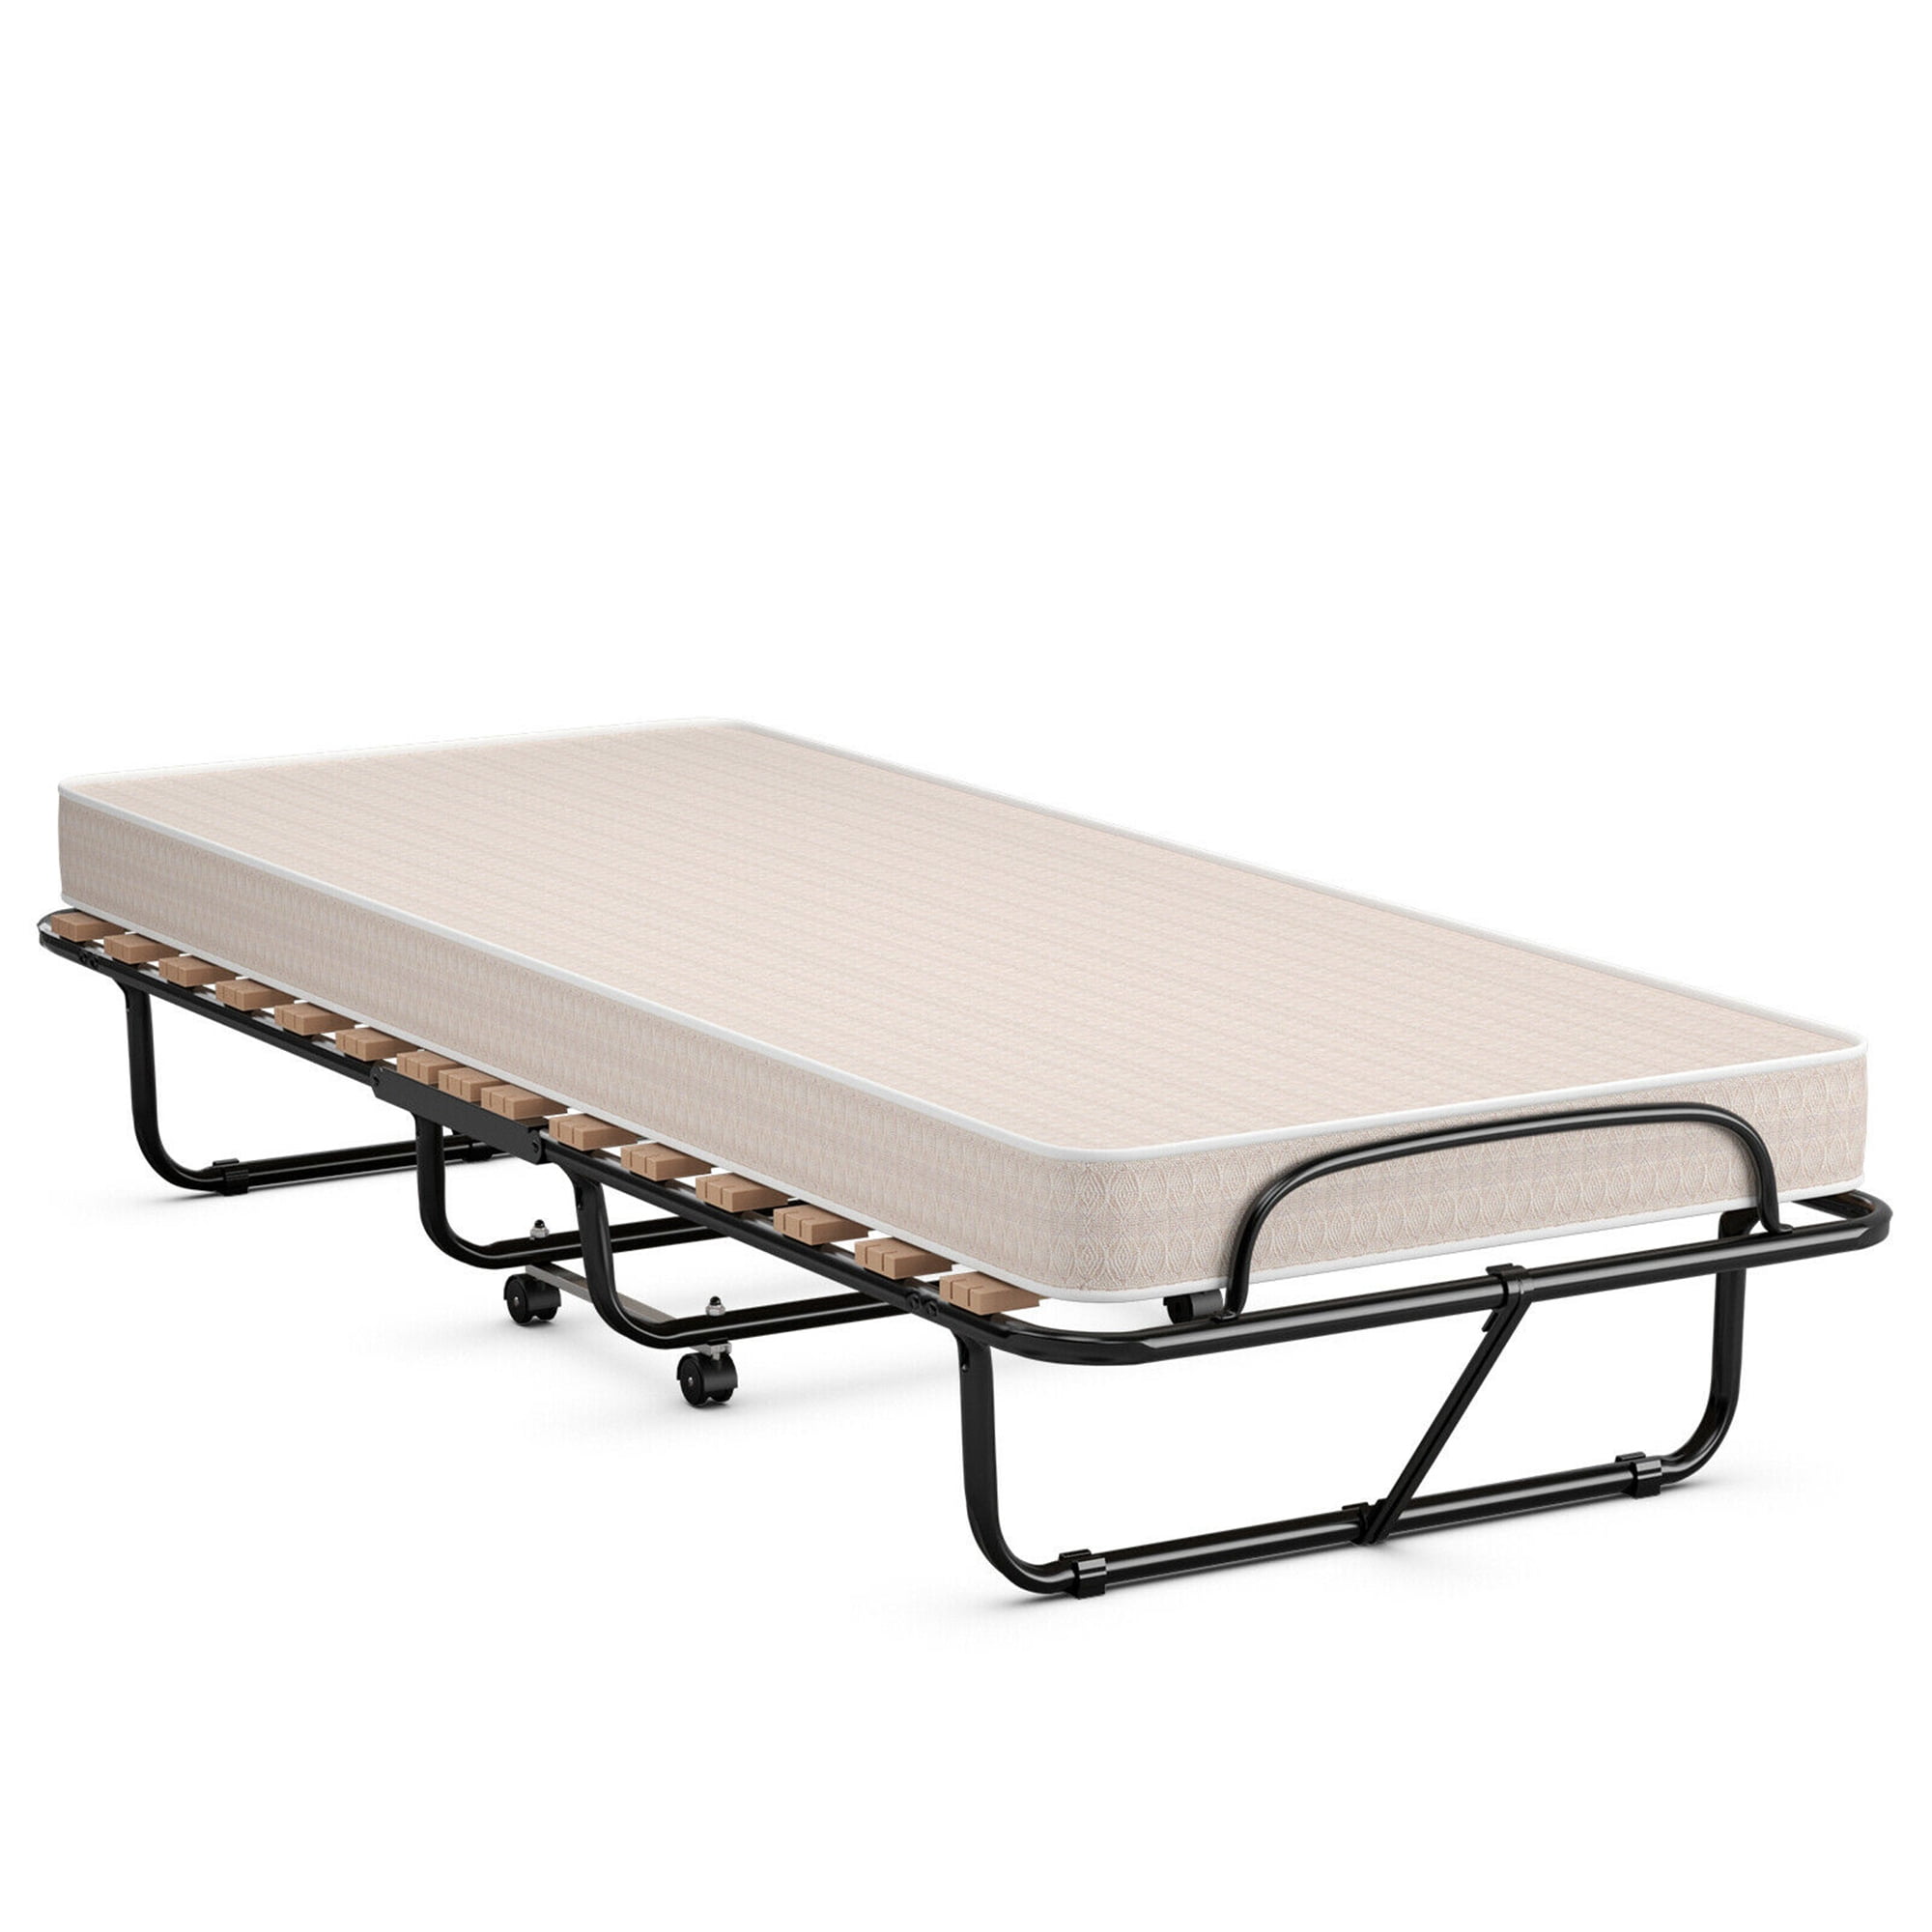 Single Foldable Bed Folding with Mattress Portable Cot Durable Camping Spare Bed 